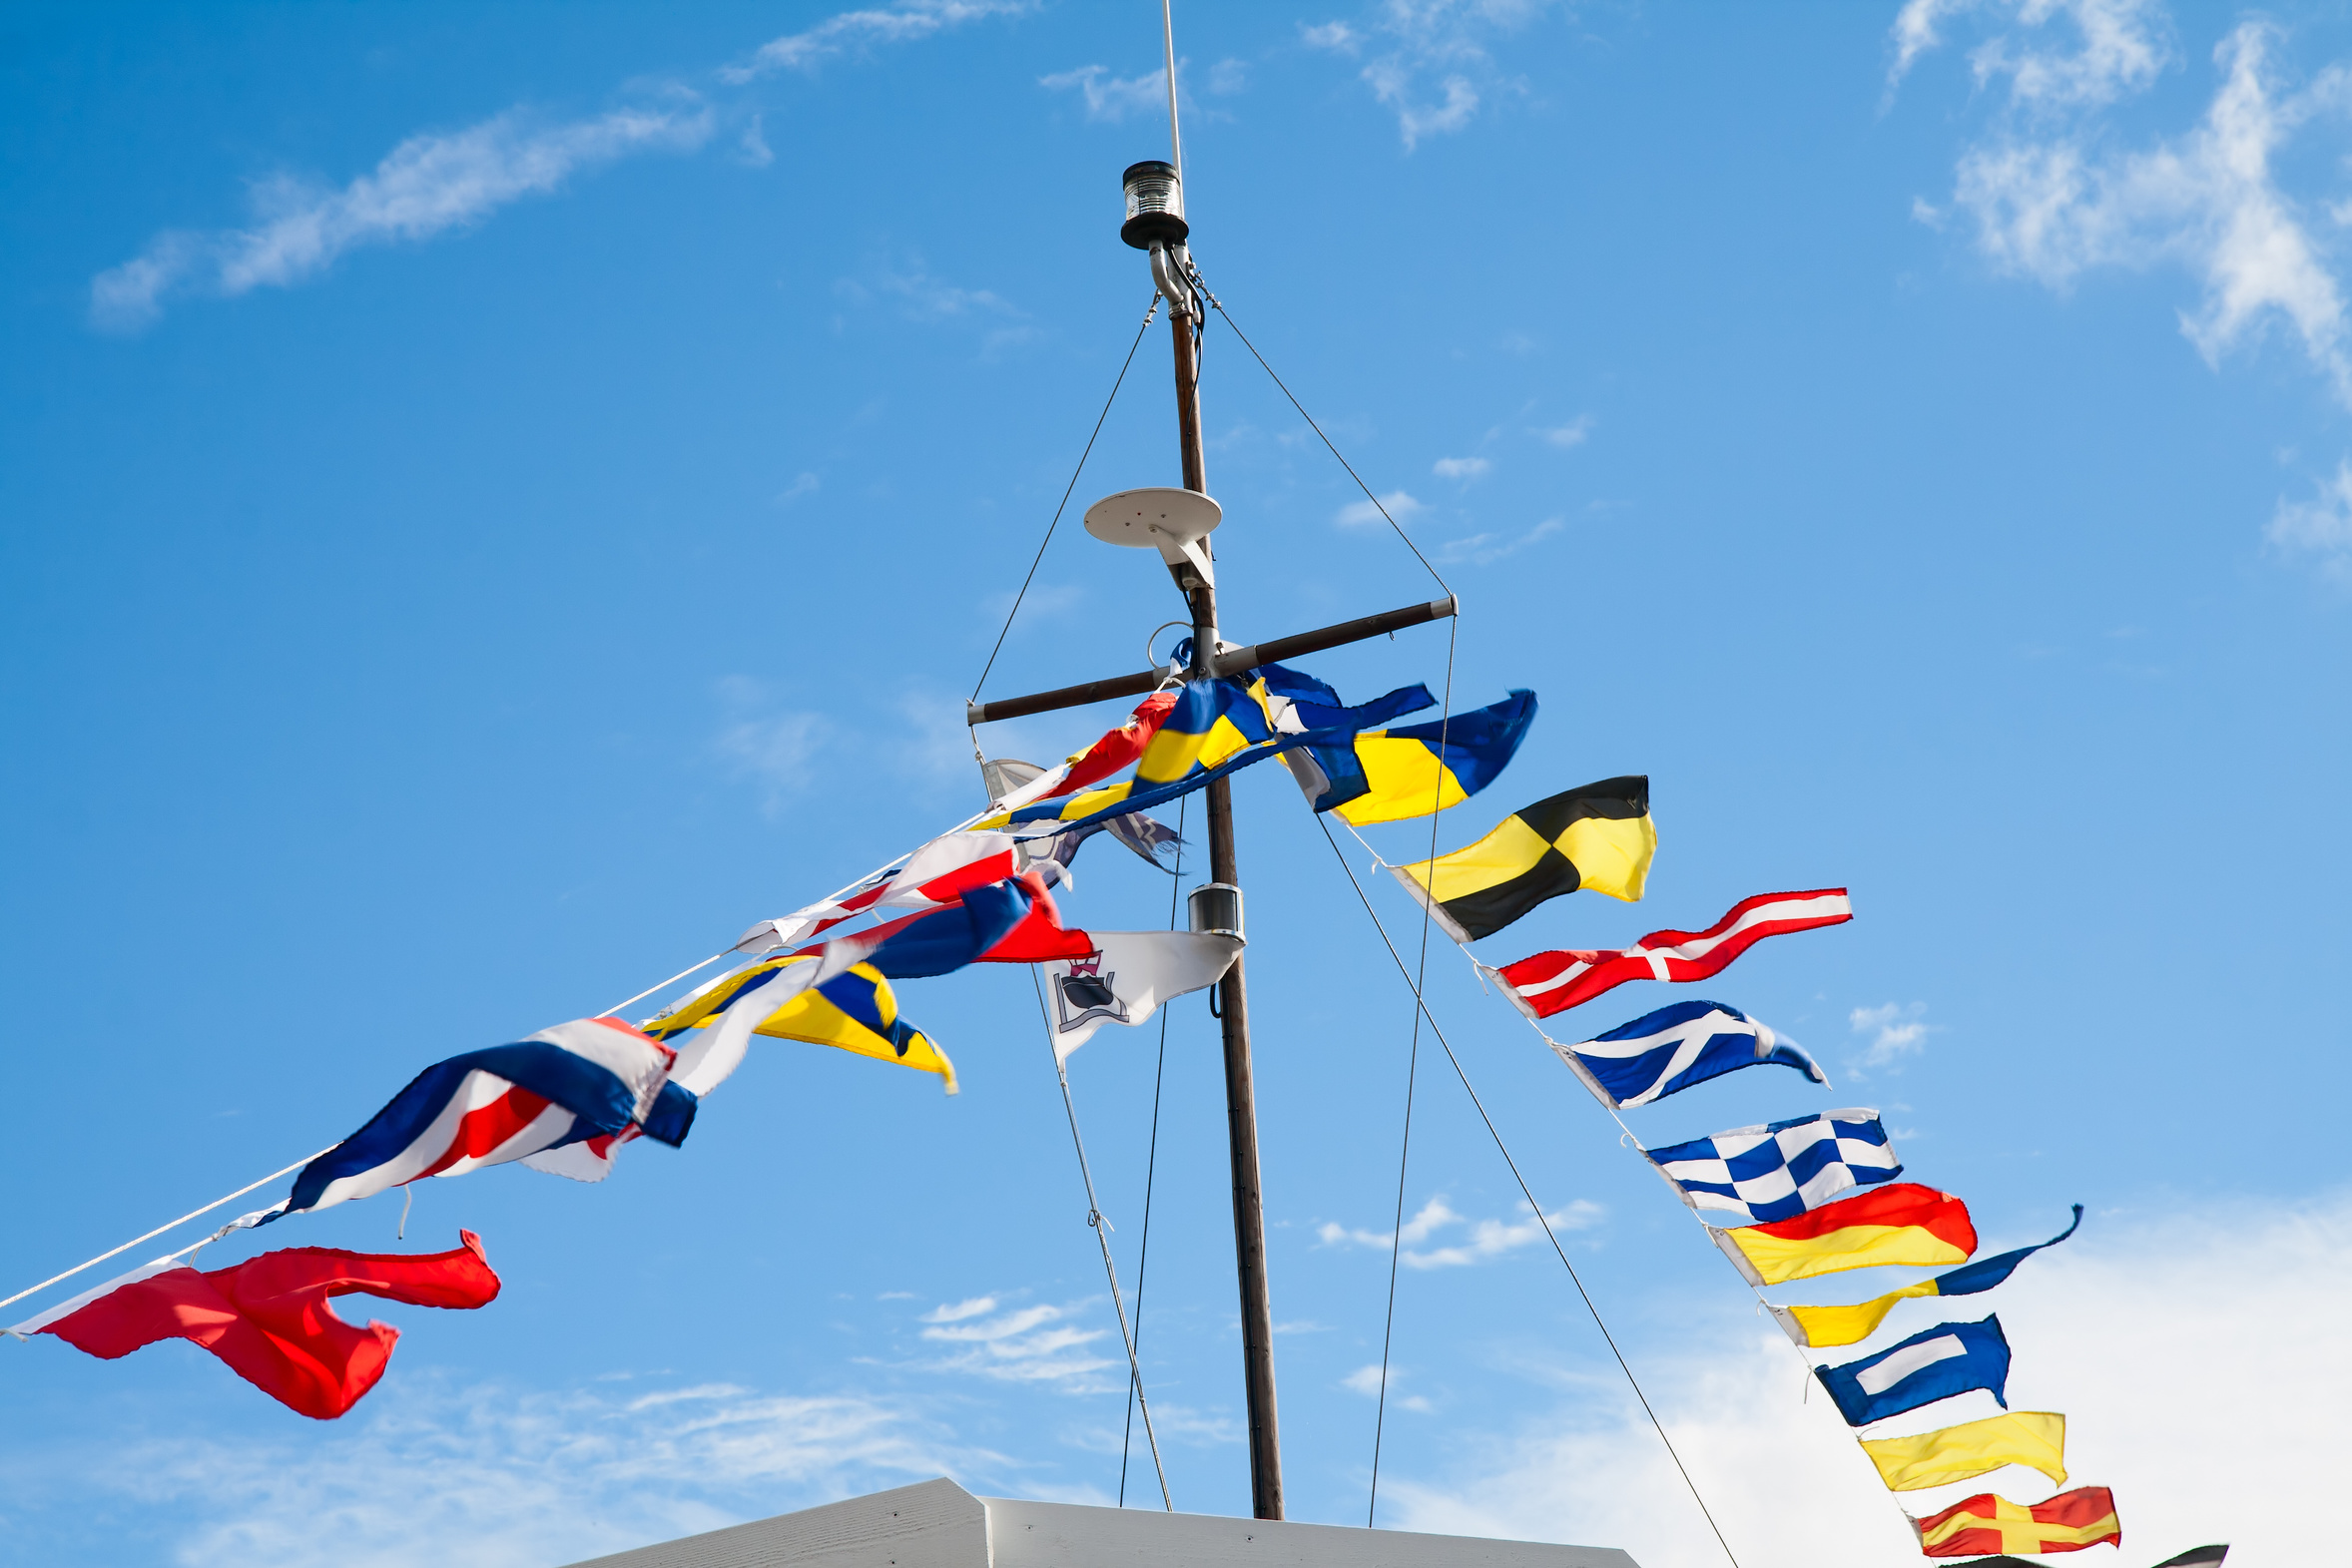 Mast with signal flags against blue sky